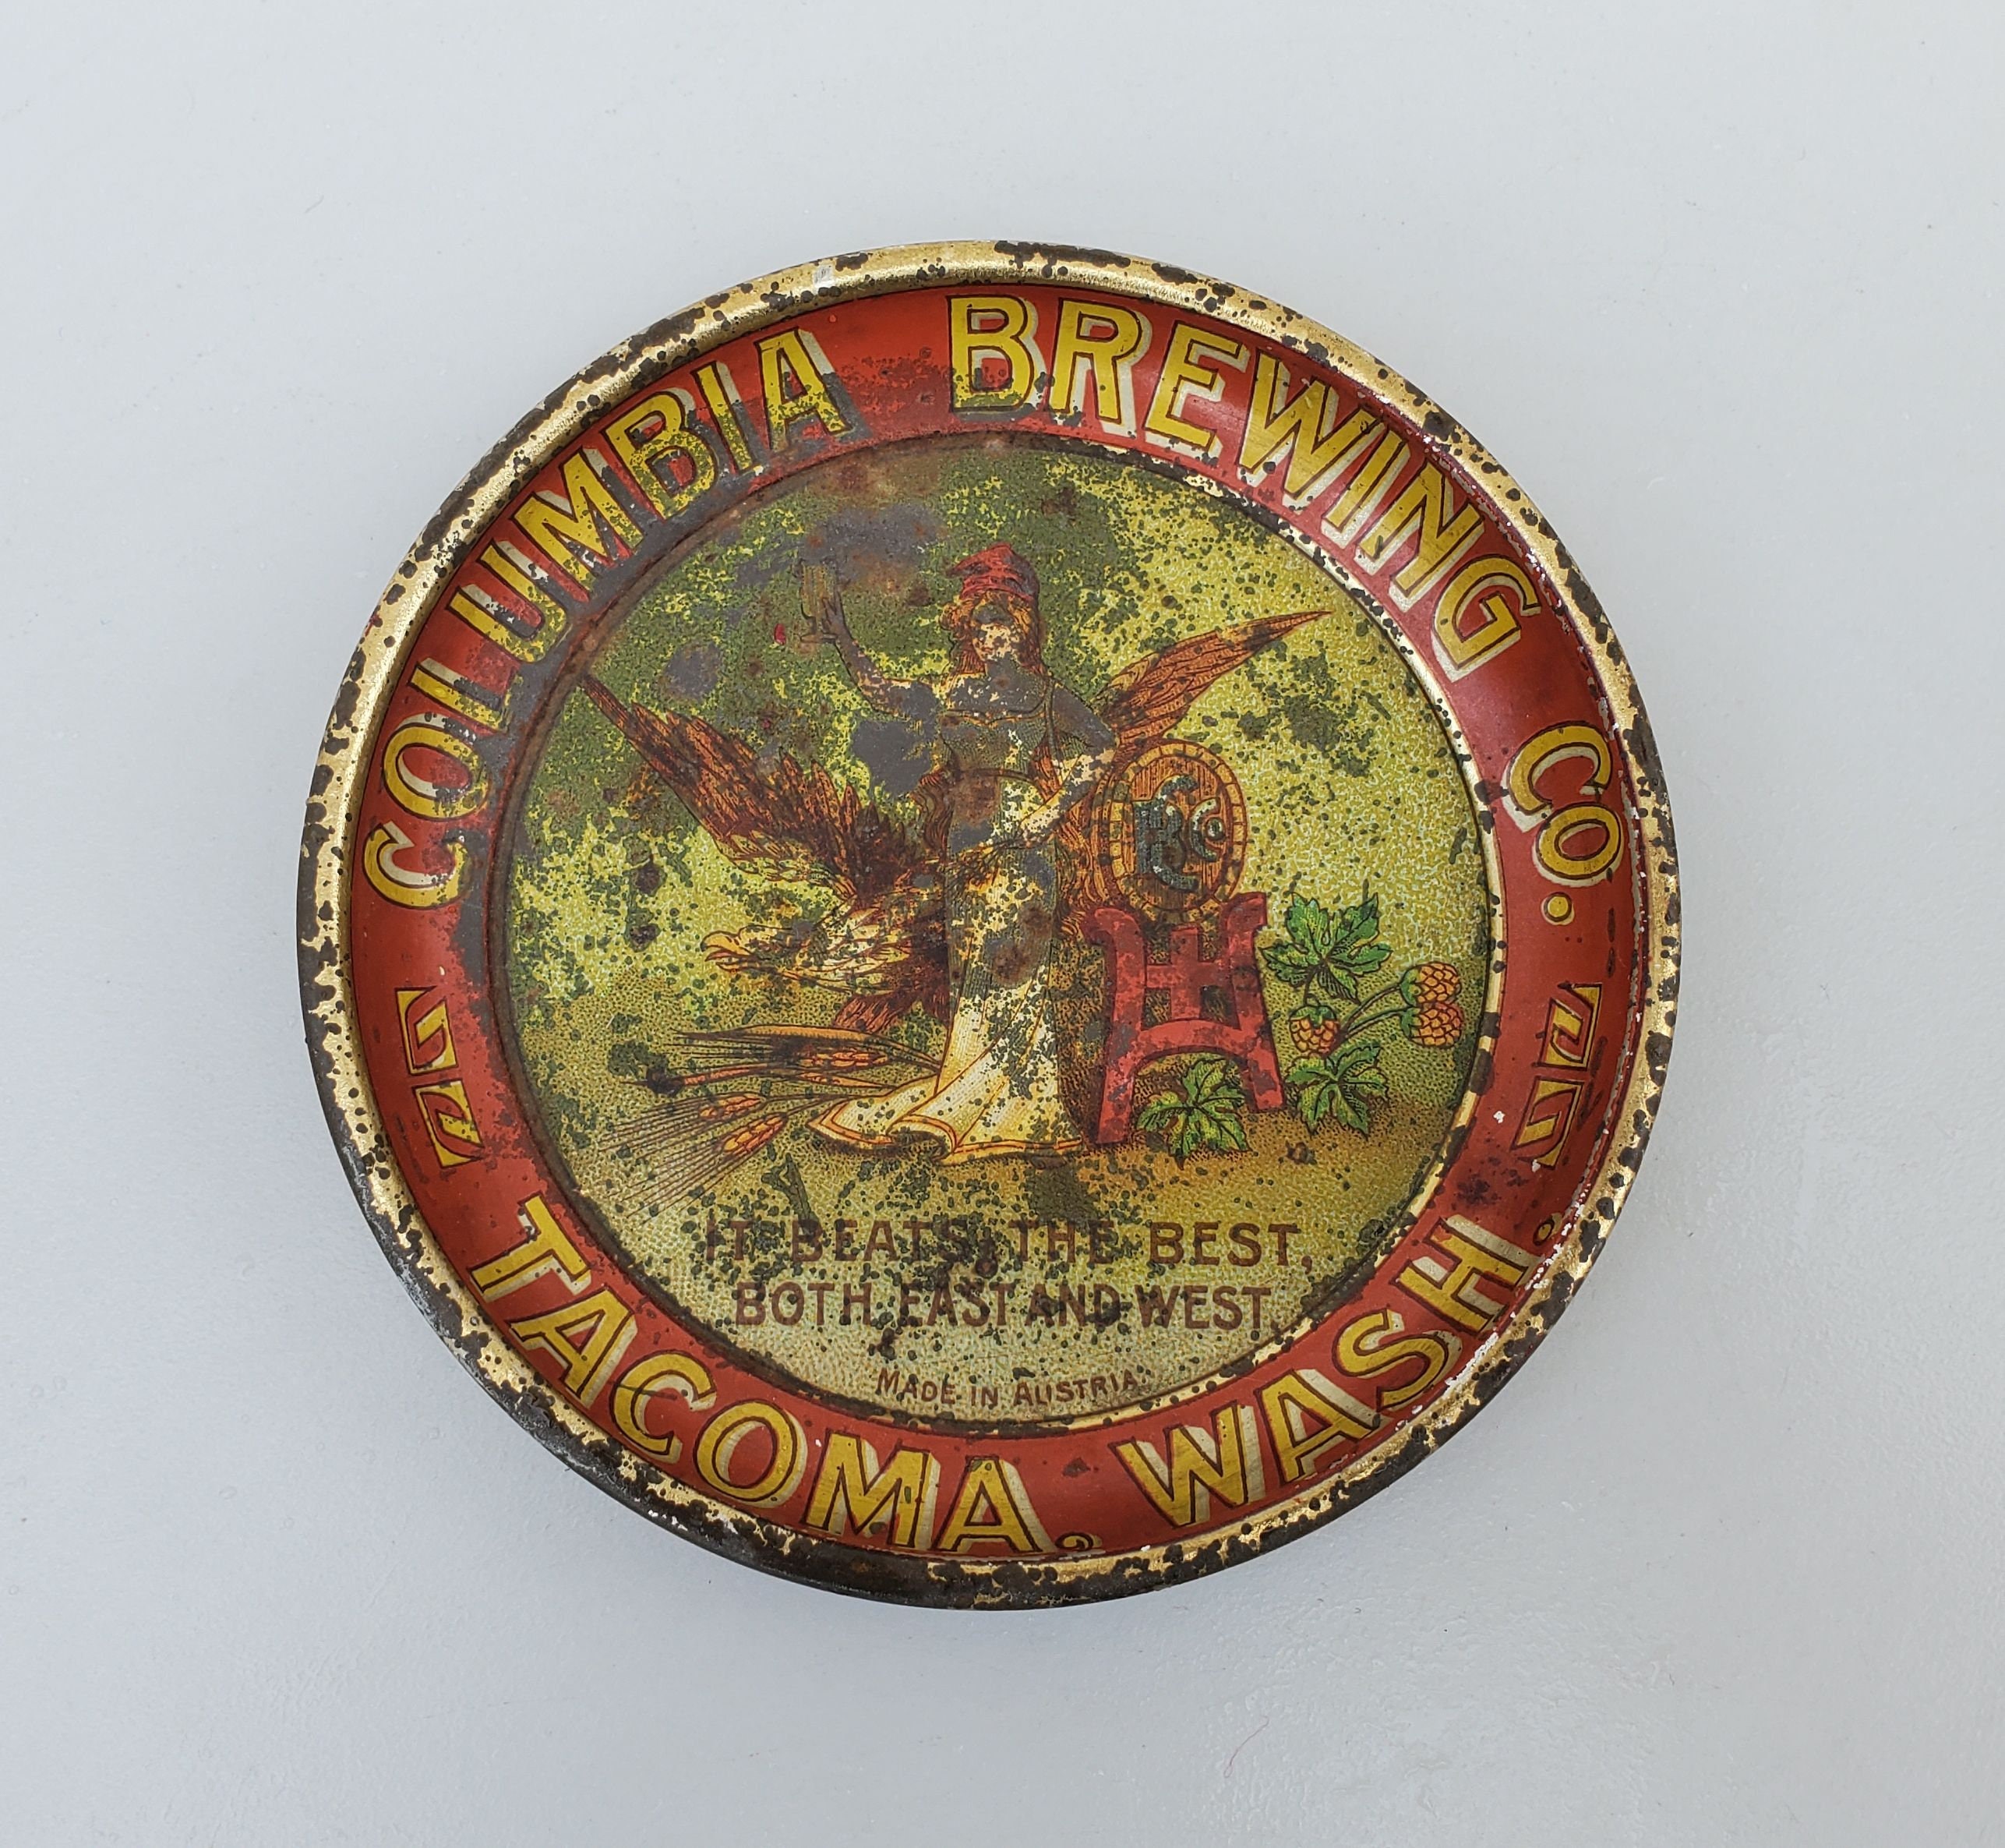 At Auction: 2 Advertising Tip Trays, Incl. Resinol Soap and Ointment and  Wellsbach Quality Mantles, 4 1/2 in. (11.4 cm.)